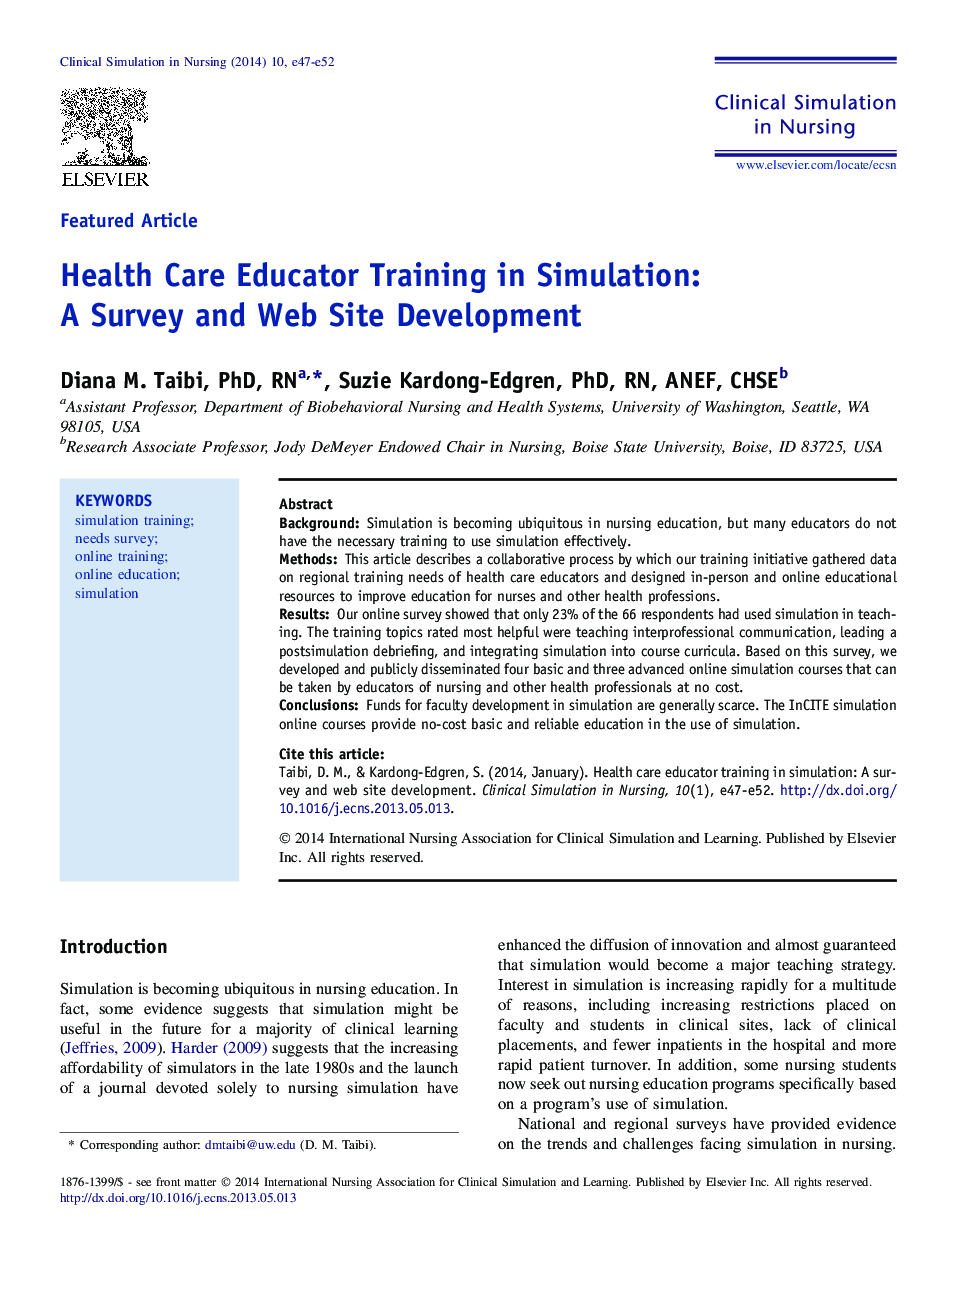 Featured ArticleHealth Care Educator Training in Simulation: A Survey and Web Site Development